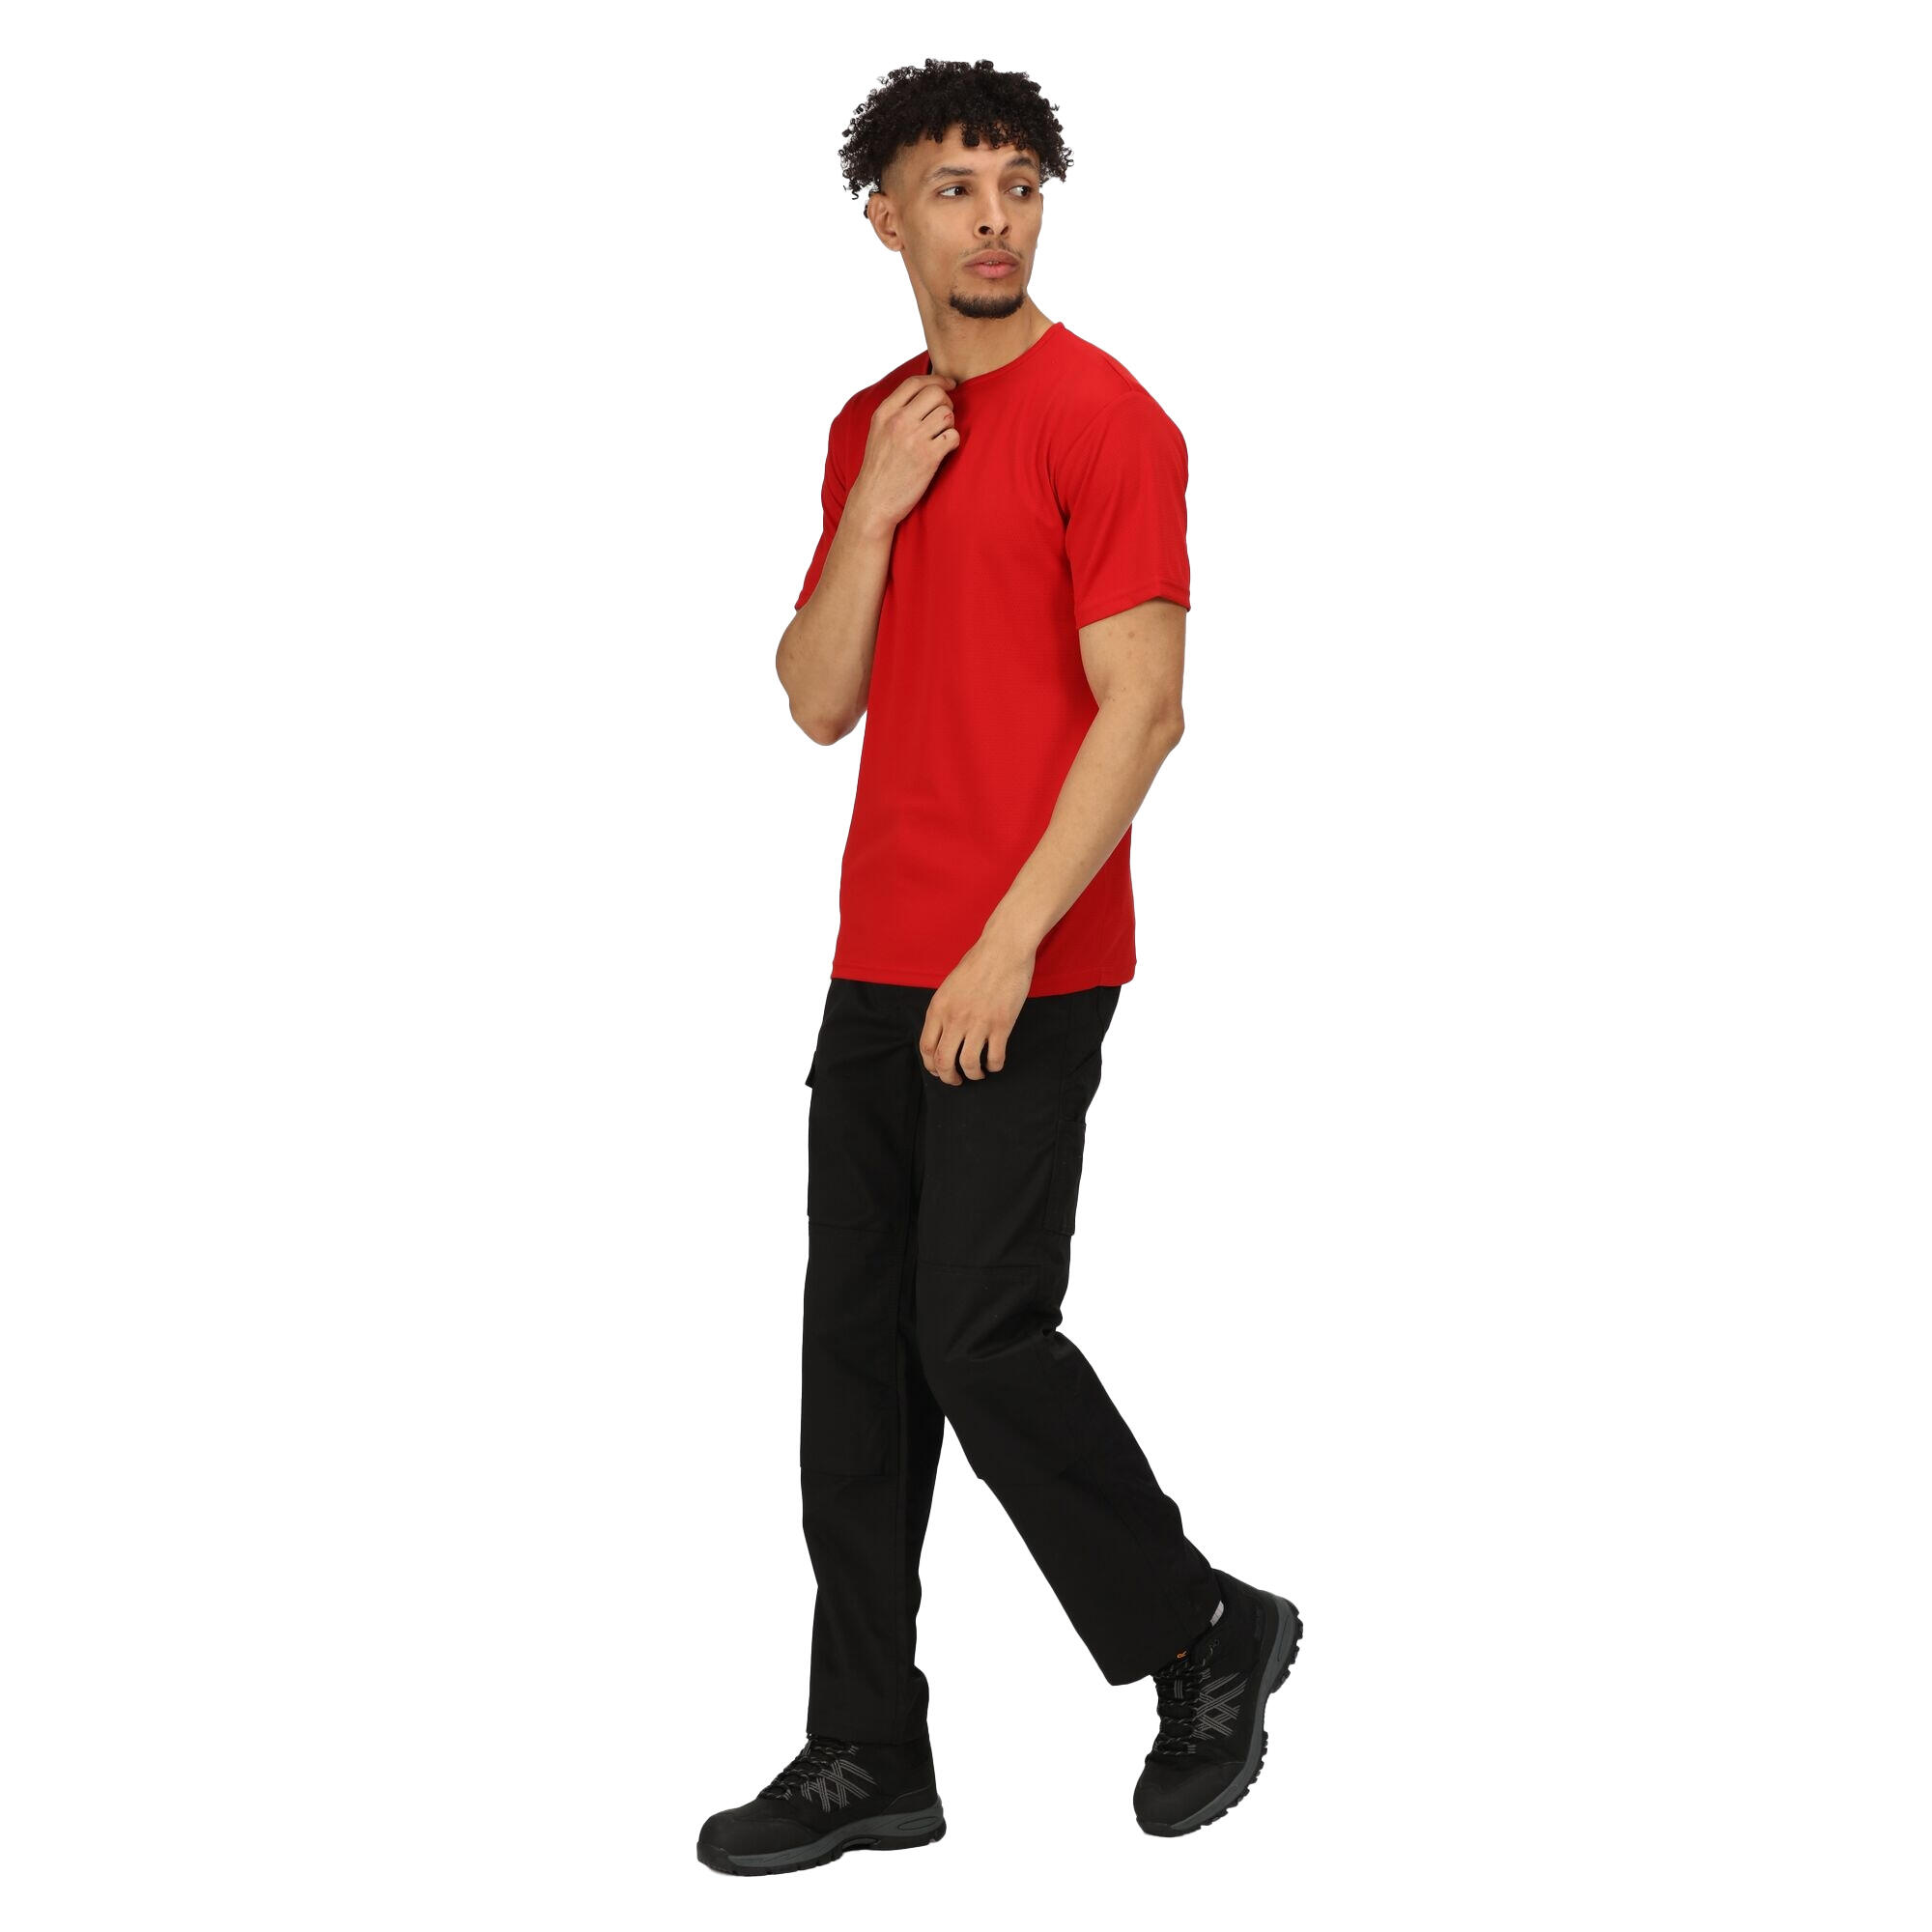 Mens Pro Reflective Moisture Wicking TShirt (Classic Red) 4/5